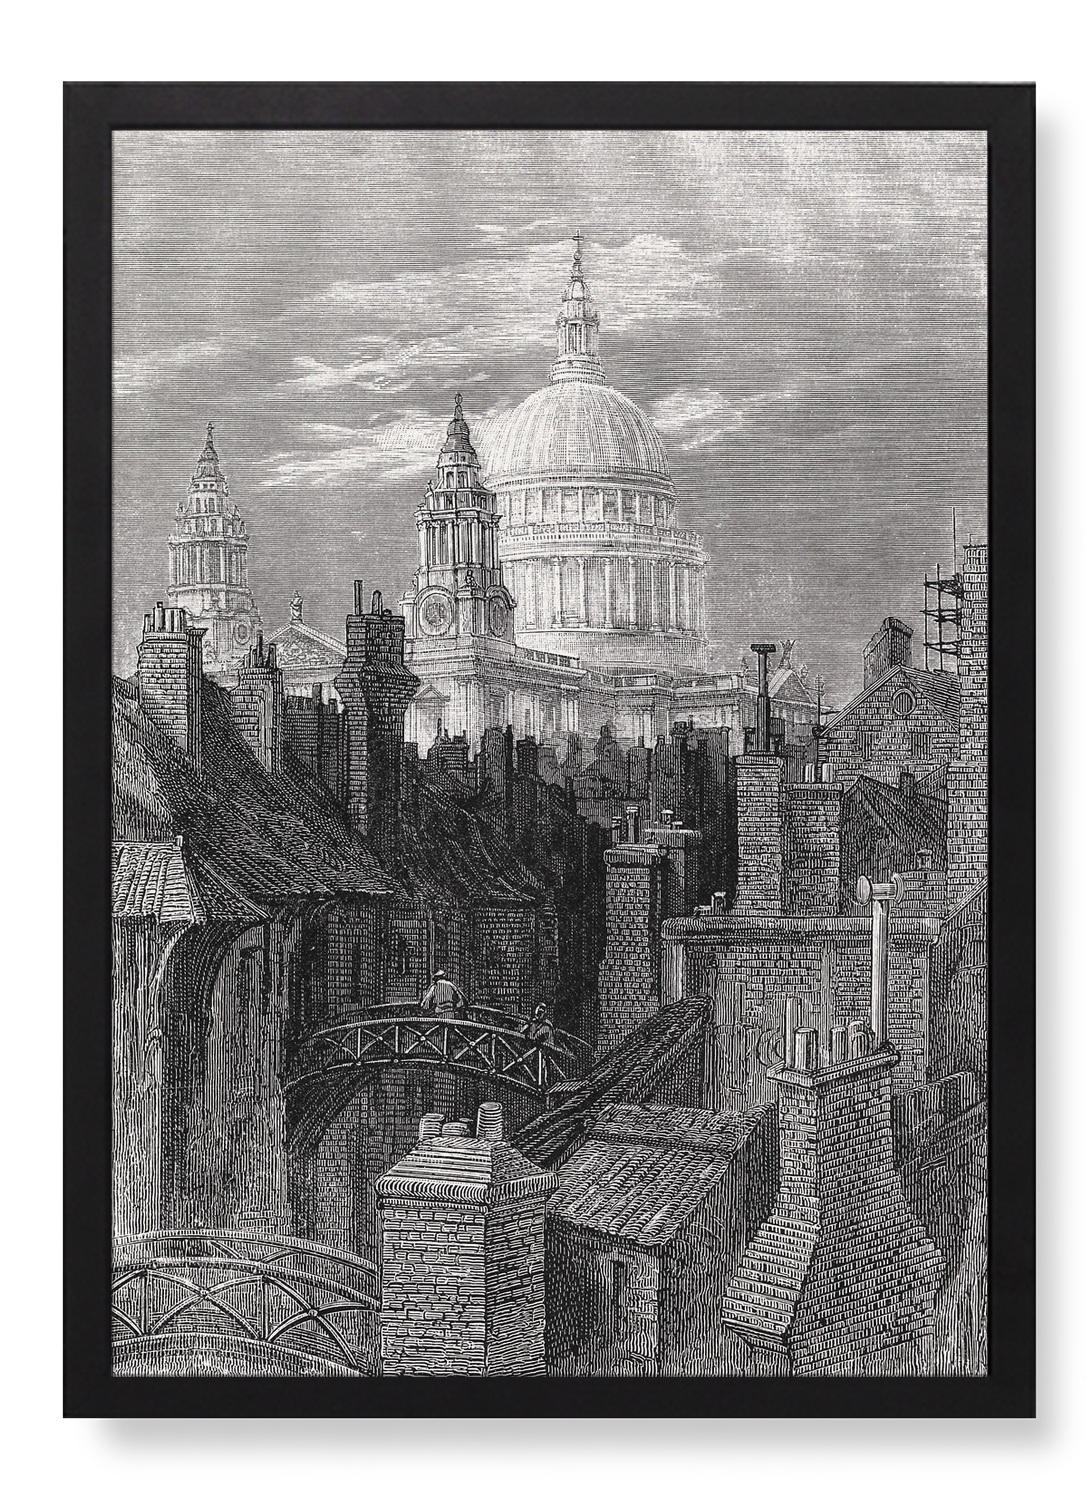 ST PAUL’S FROM THE BREWERY BRIDGE (1873)